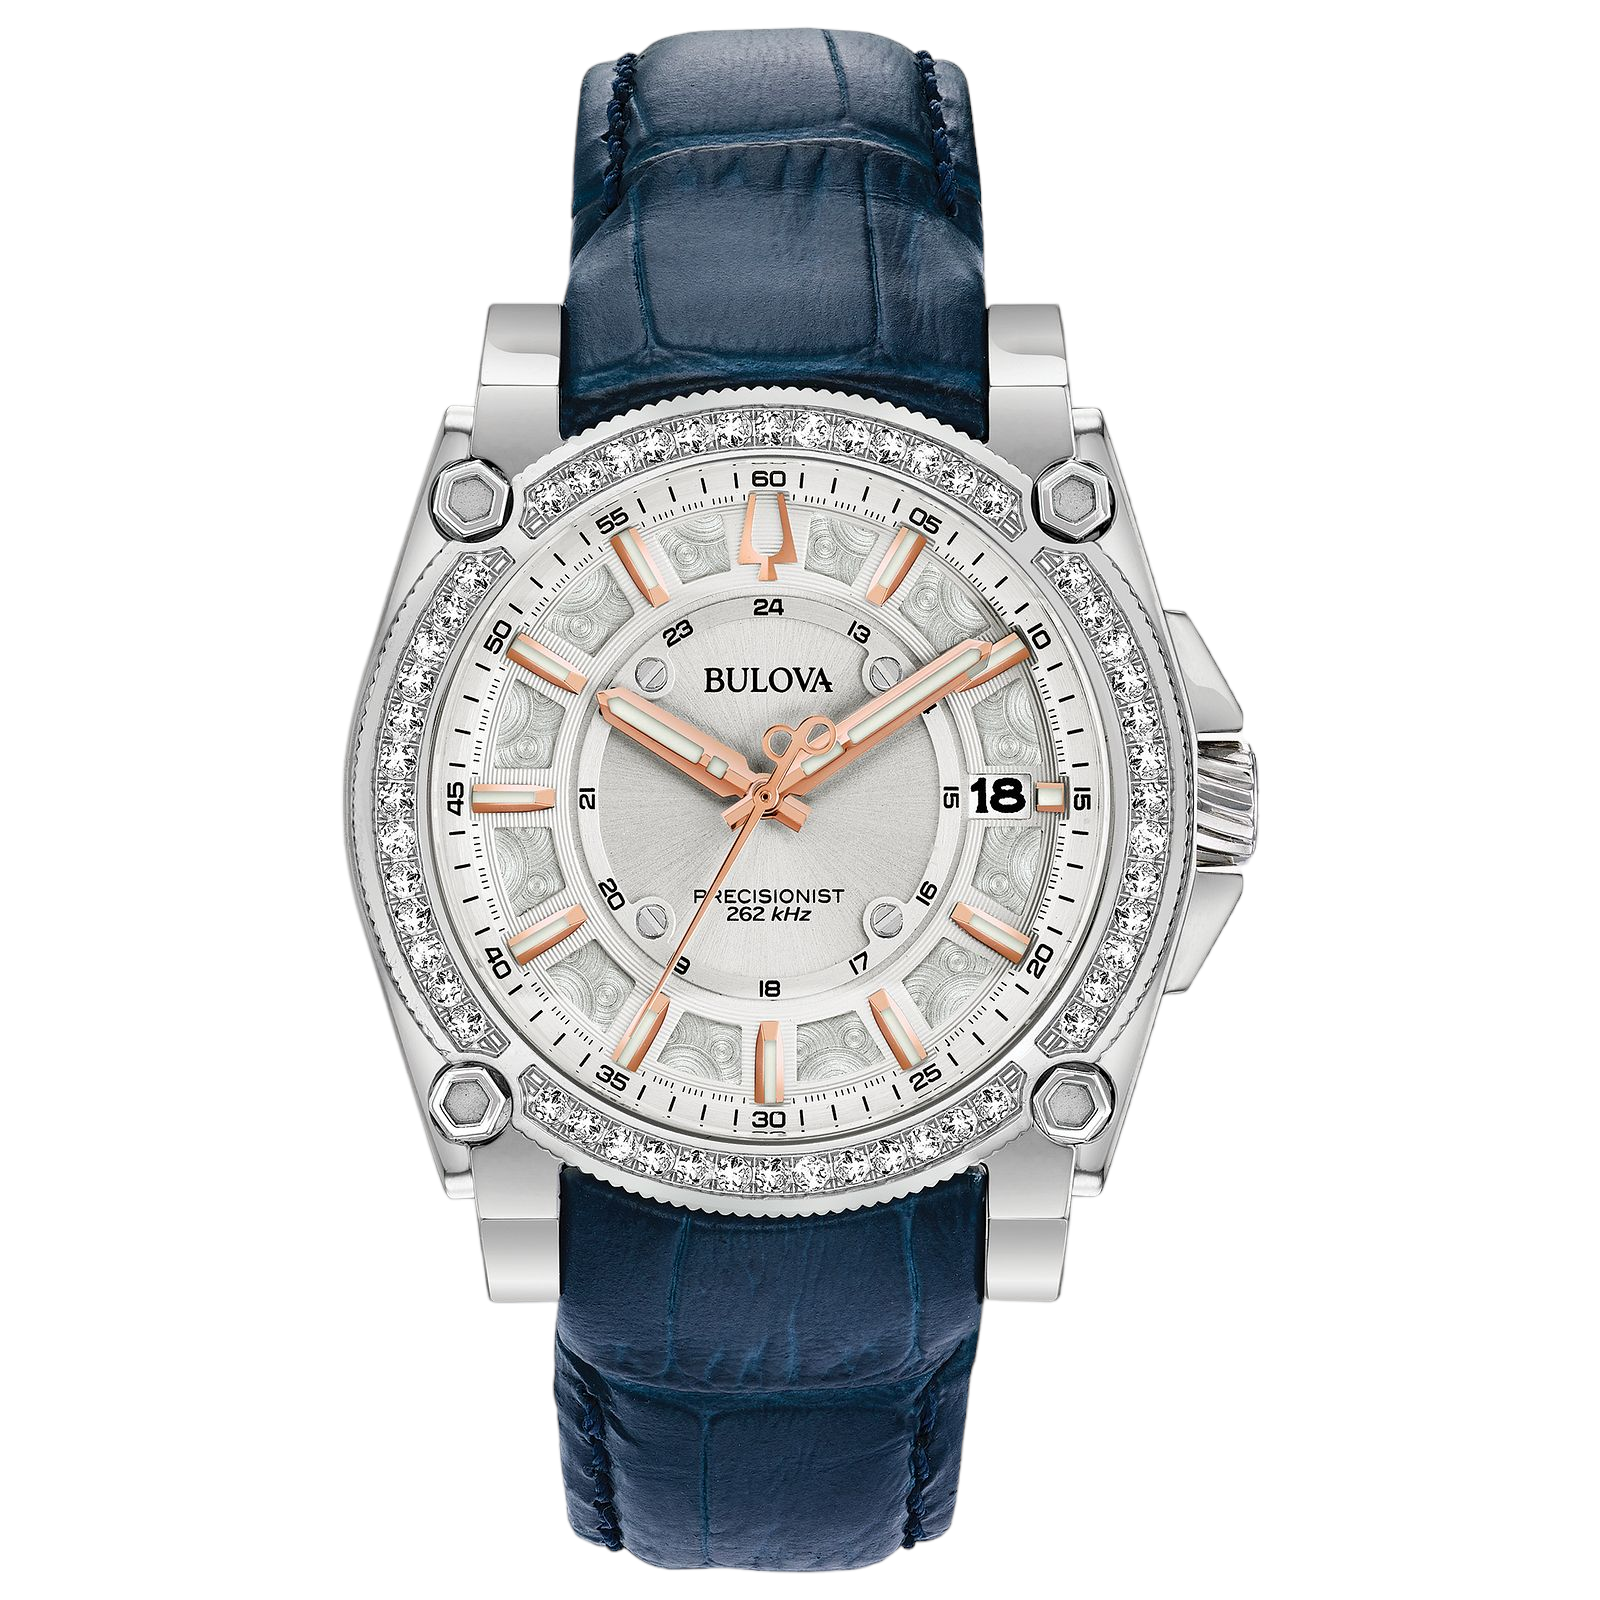 Bulova 40mm Precisionist Stainless Steel Watch with Silver Dial and Diamond Bezel. (Pre-Owned 96R227)